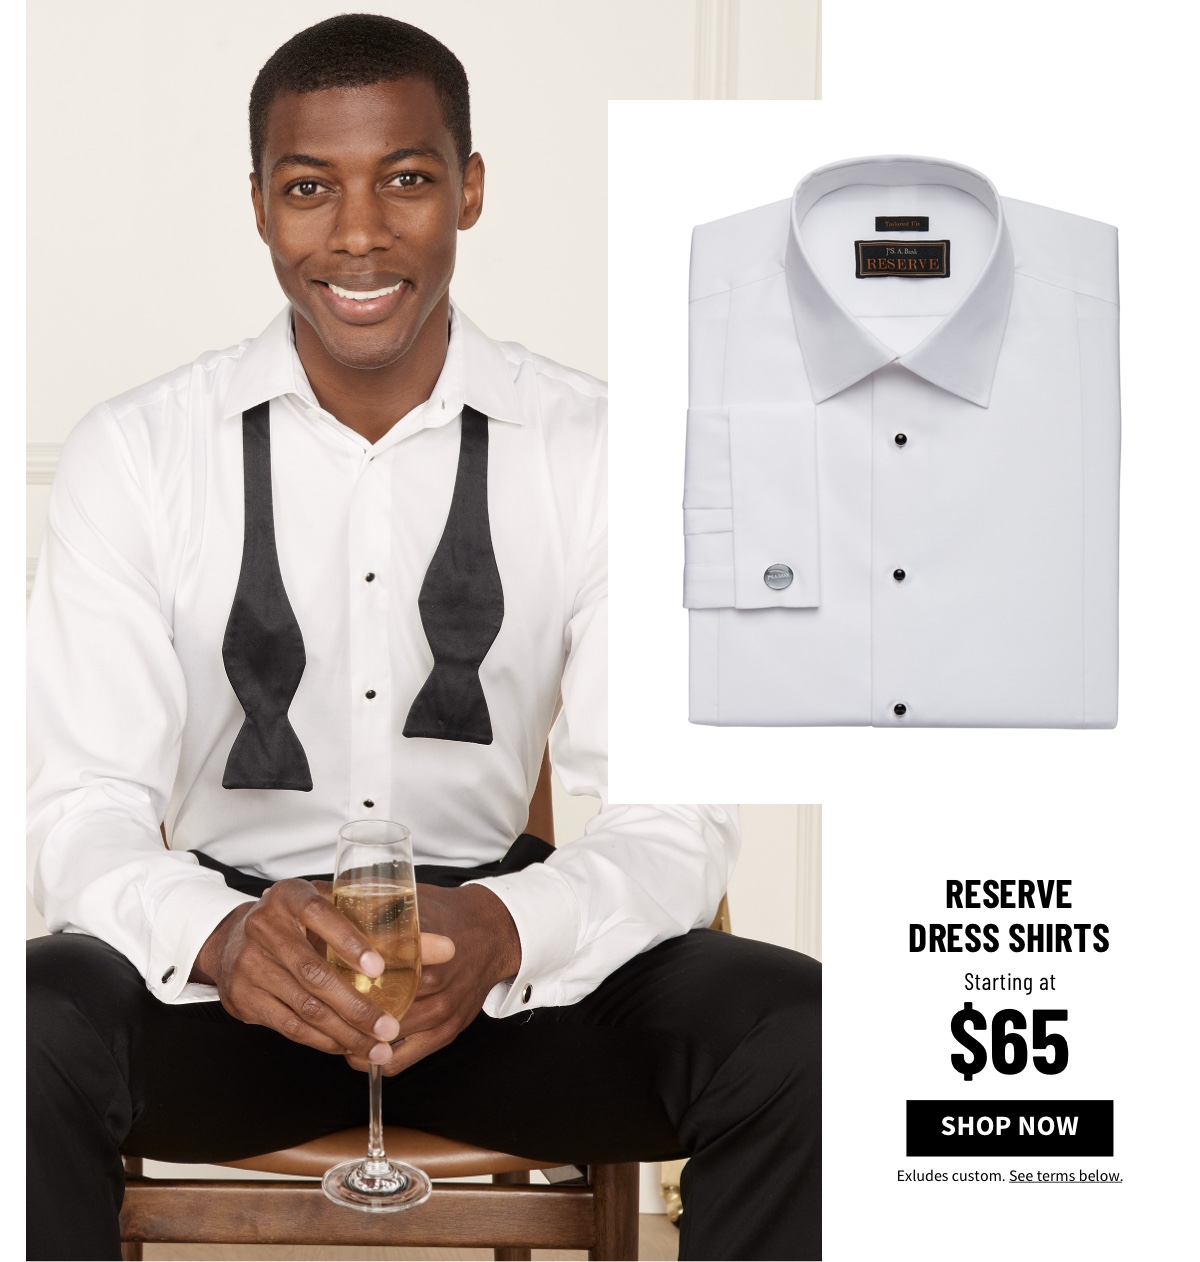 Reserve Dress Shirts Starting at $65 Shop Now Excludes custom. See terms below.